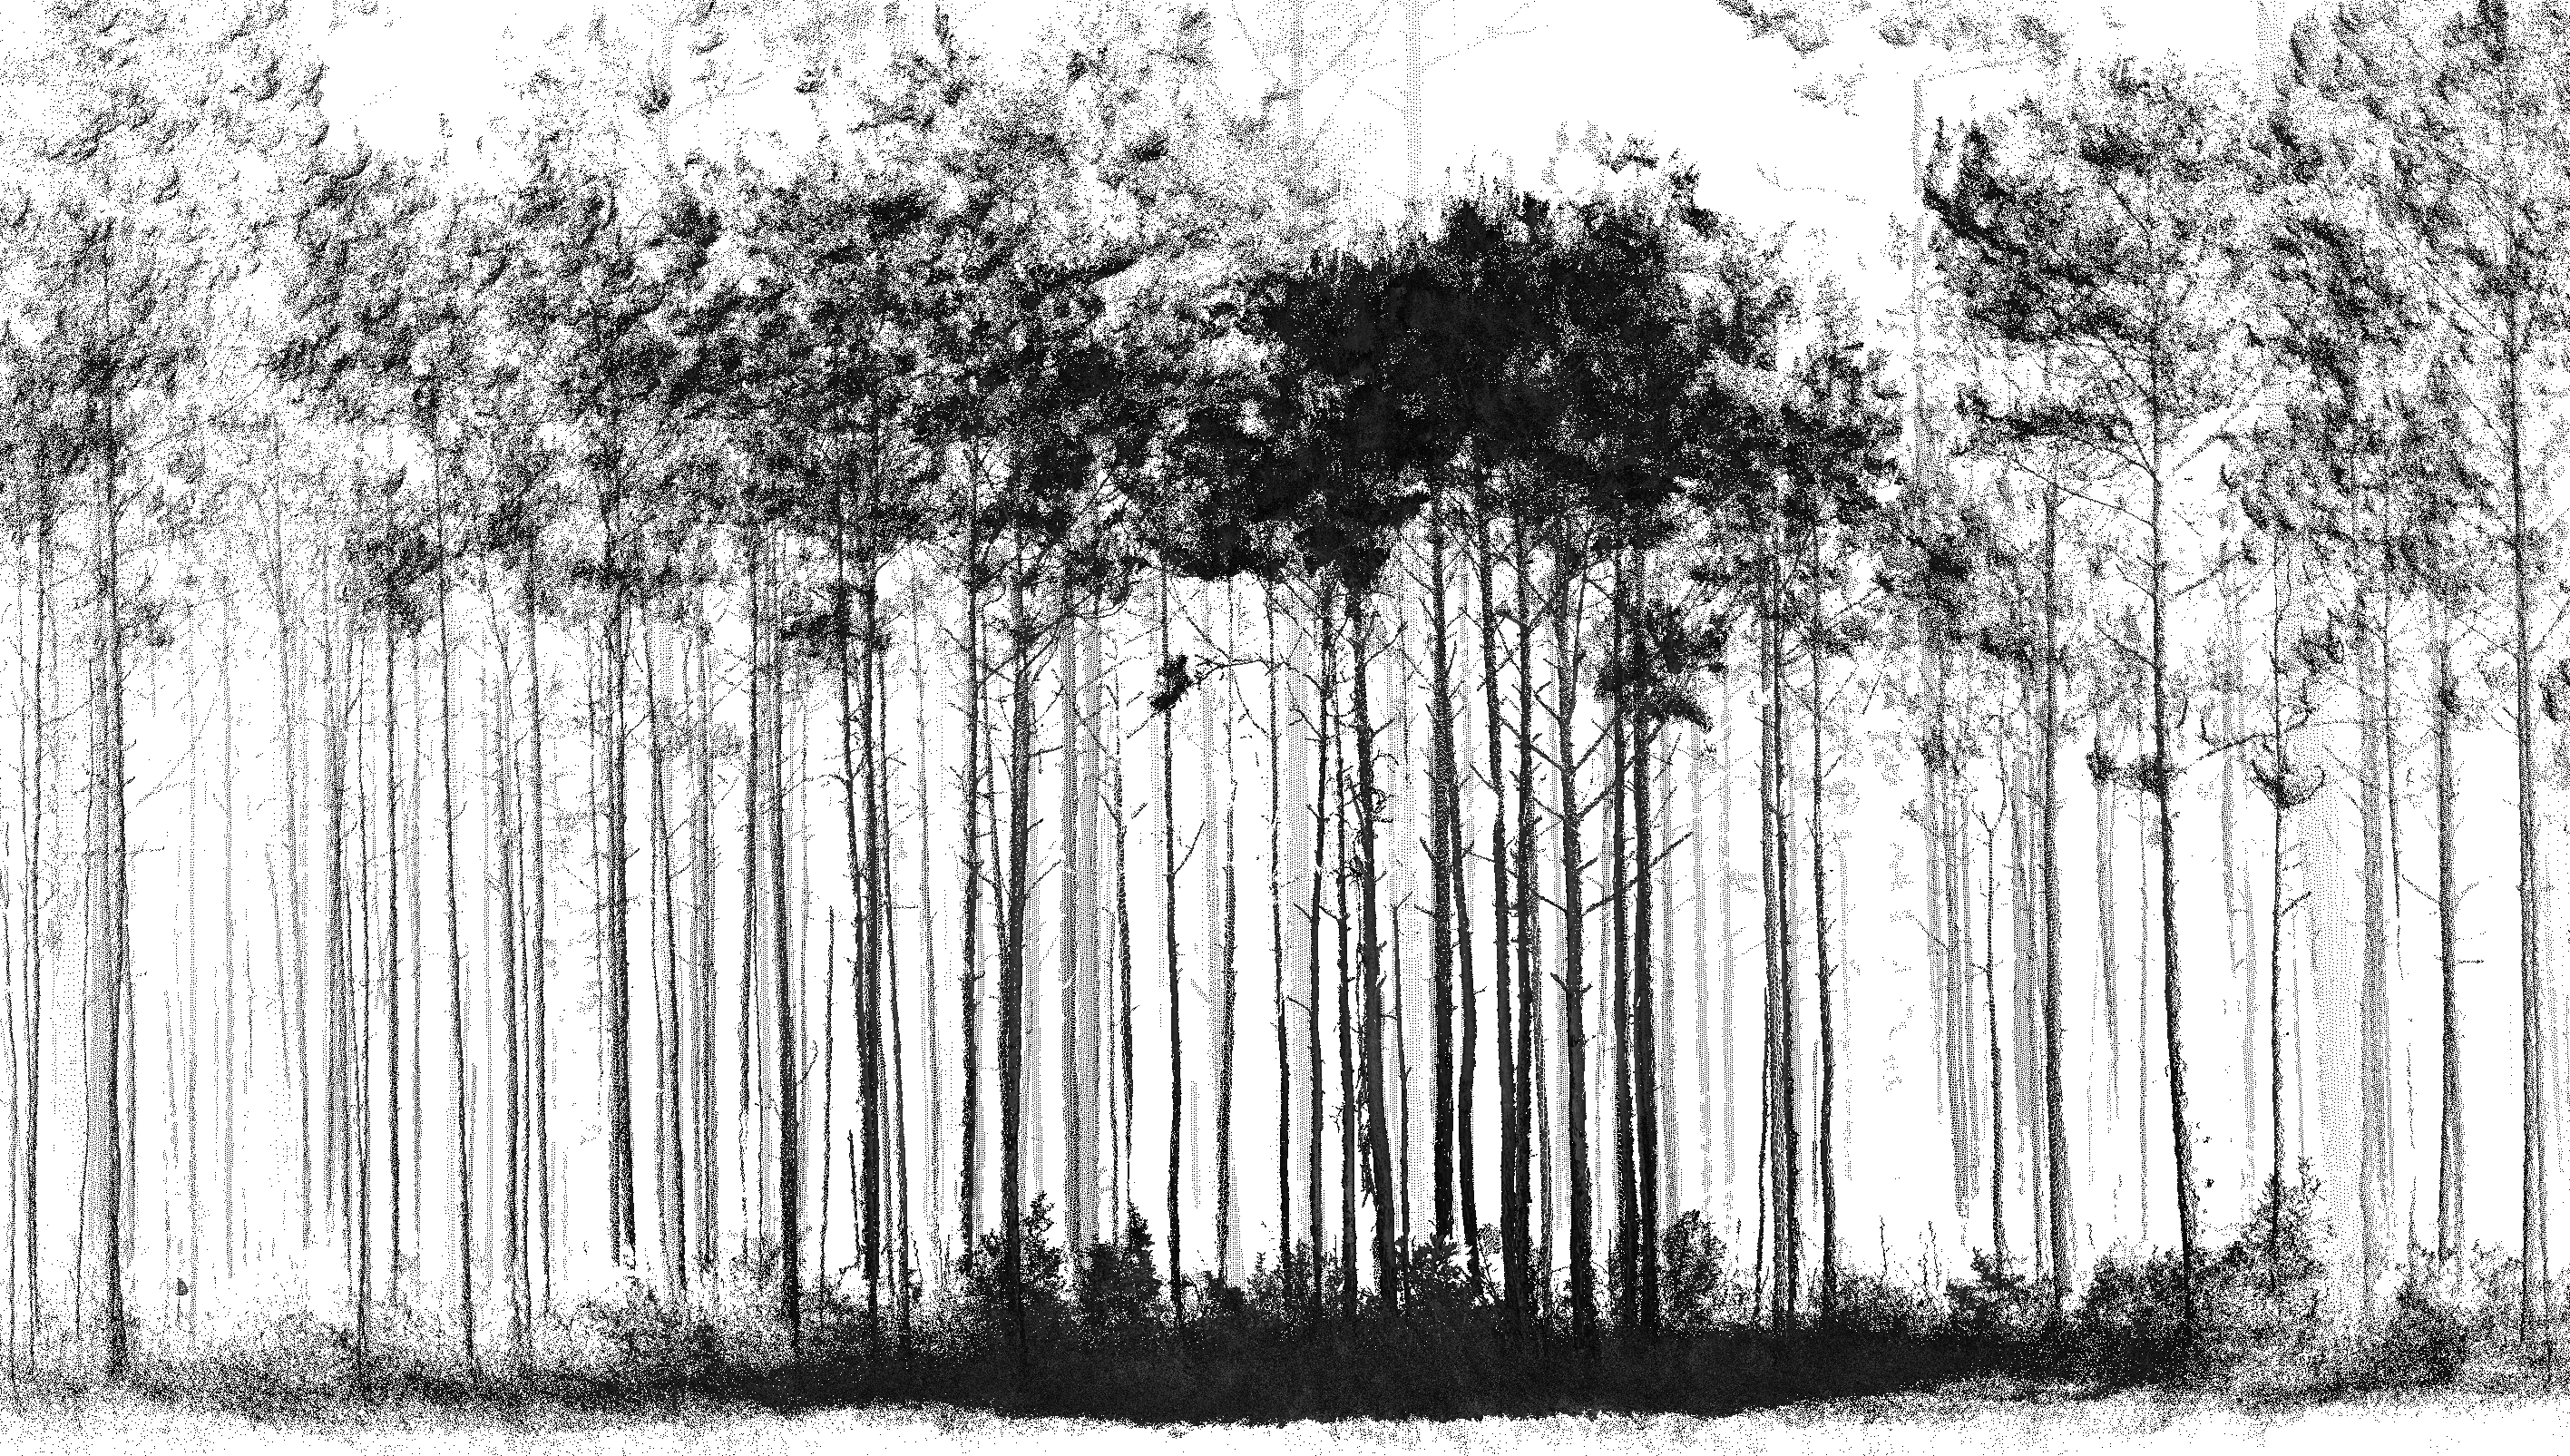 black and white image of trees